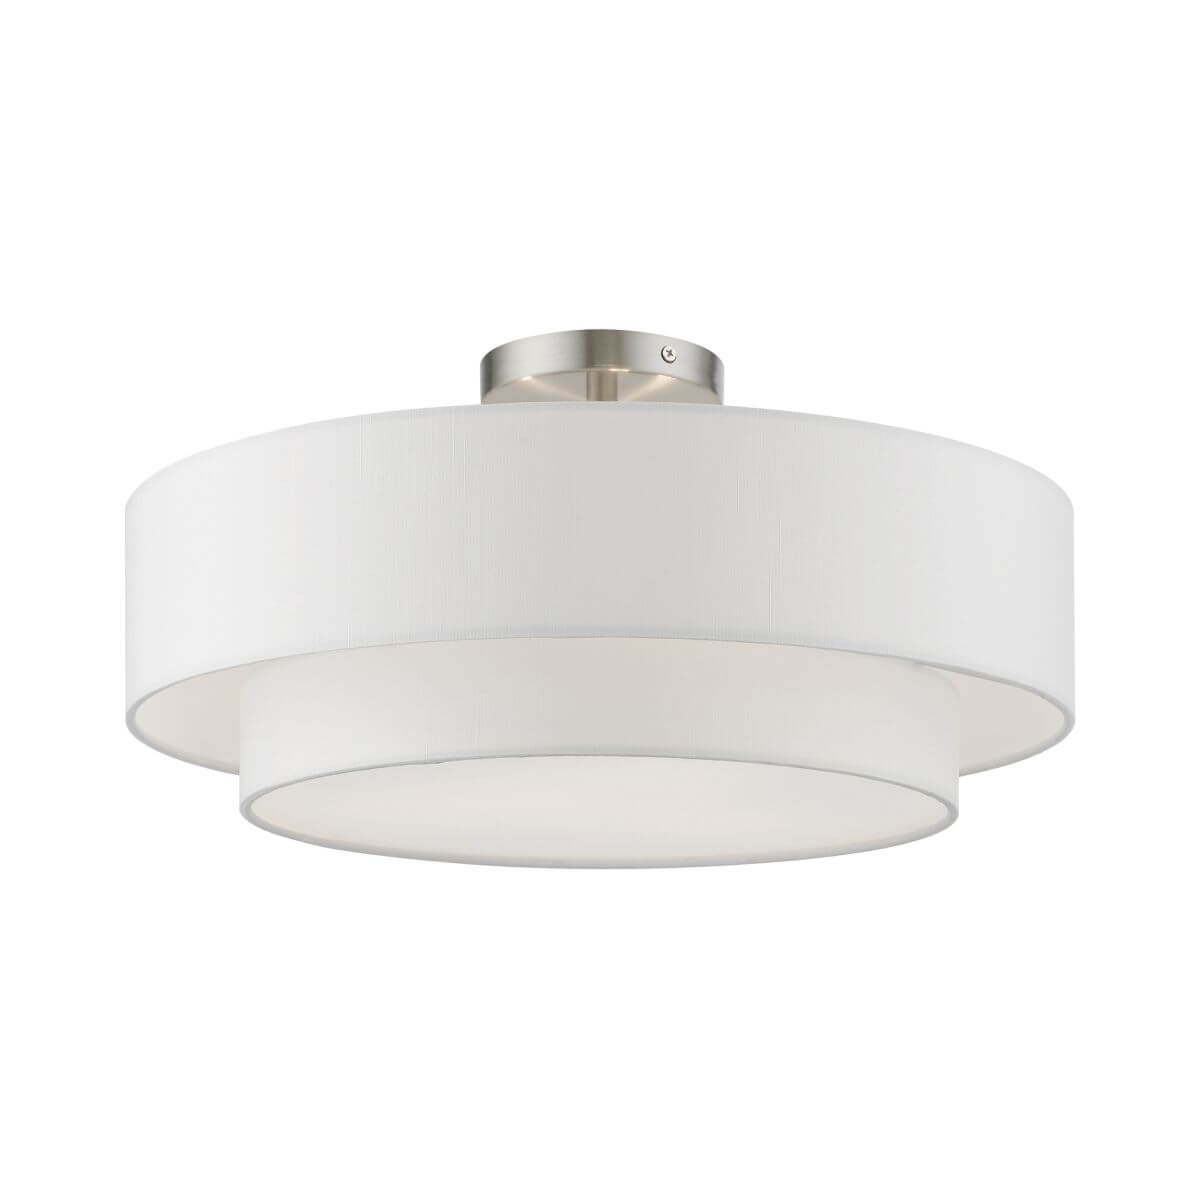 Livex 47154-91 Meridian 3 Light 18 inch Semi-Flush Mount in Brushed Nickel with Hand Crafted Off-white Hardback Fabric Shade - White Fabric Inside